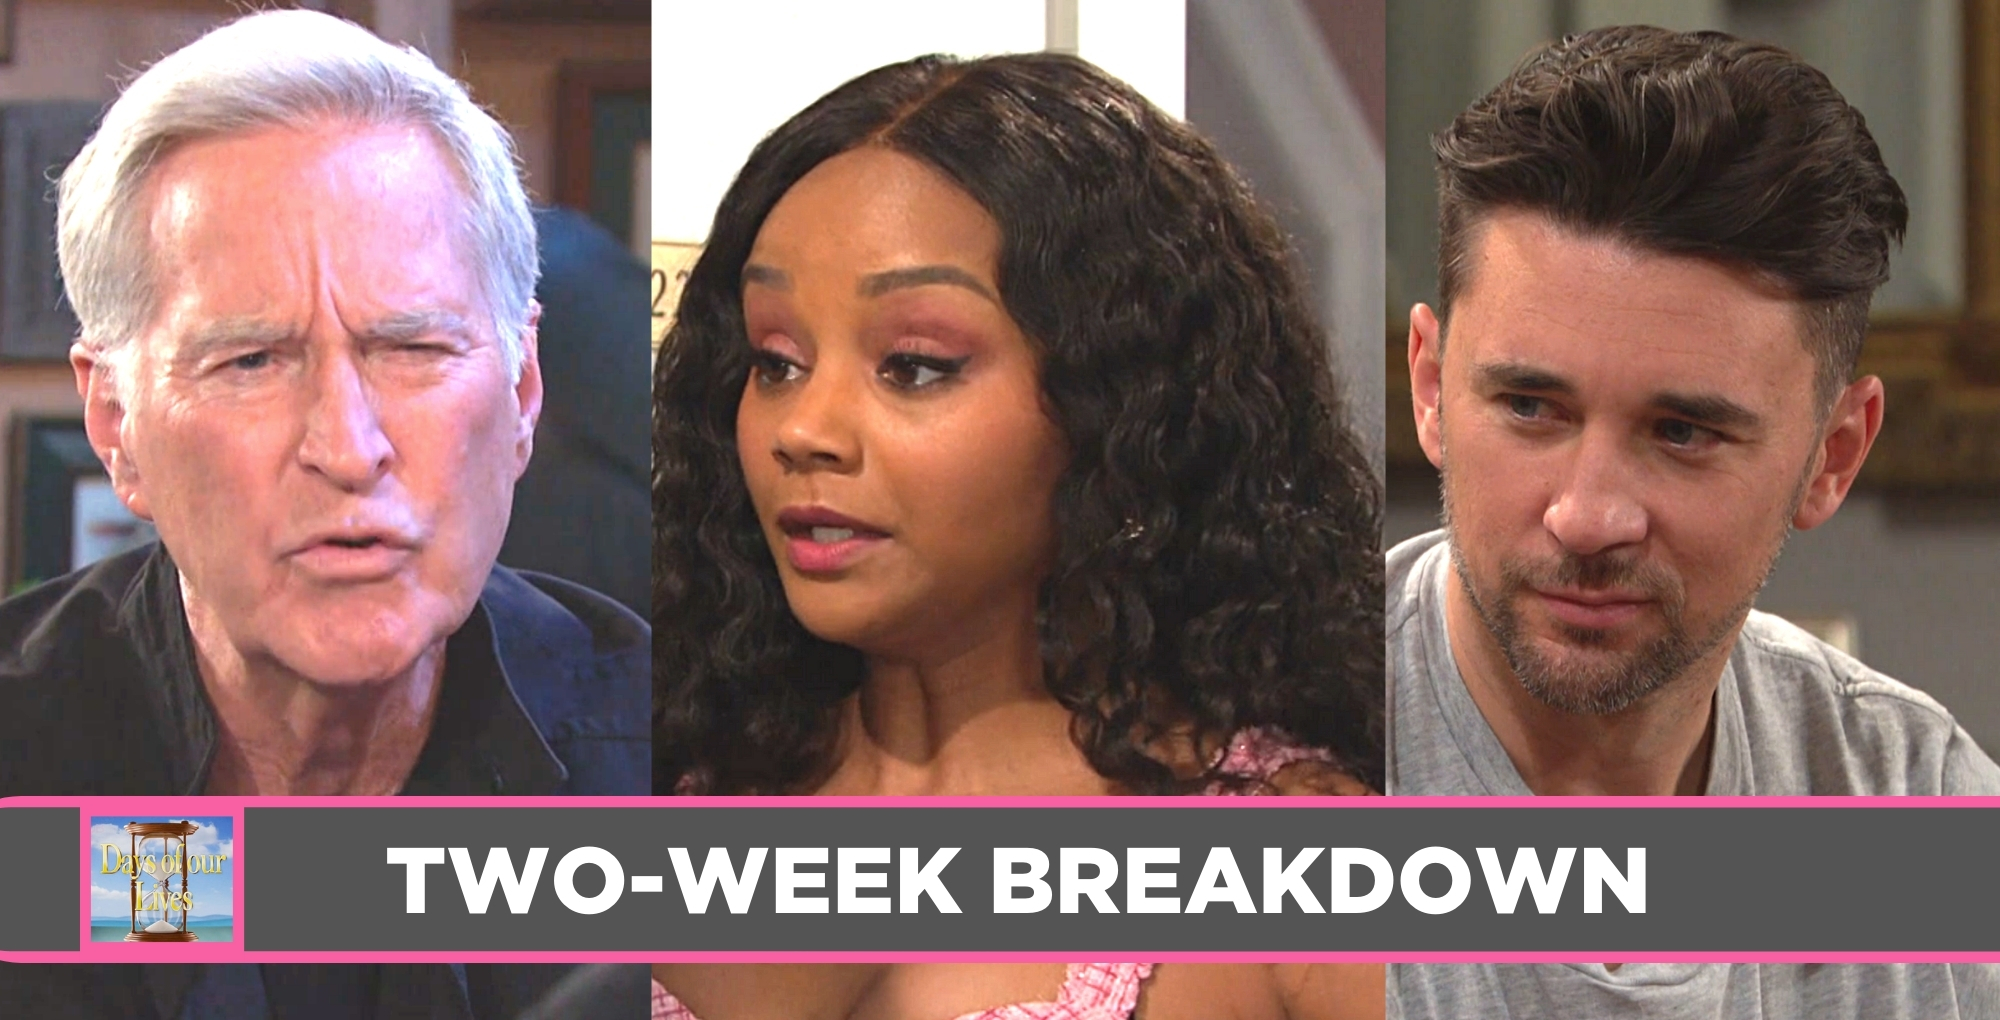 days of our lives spoilers two week breakdown, john, chanel, and chad.